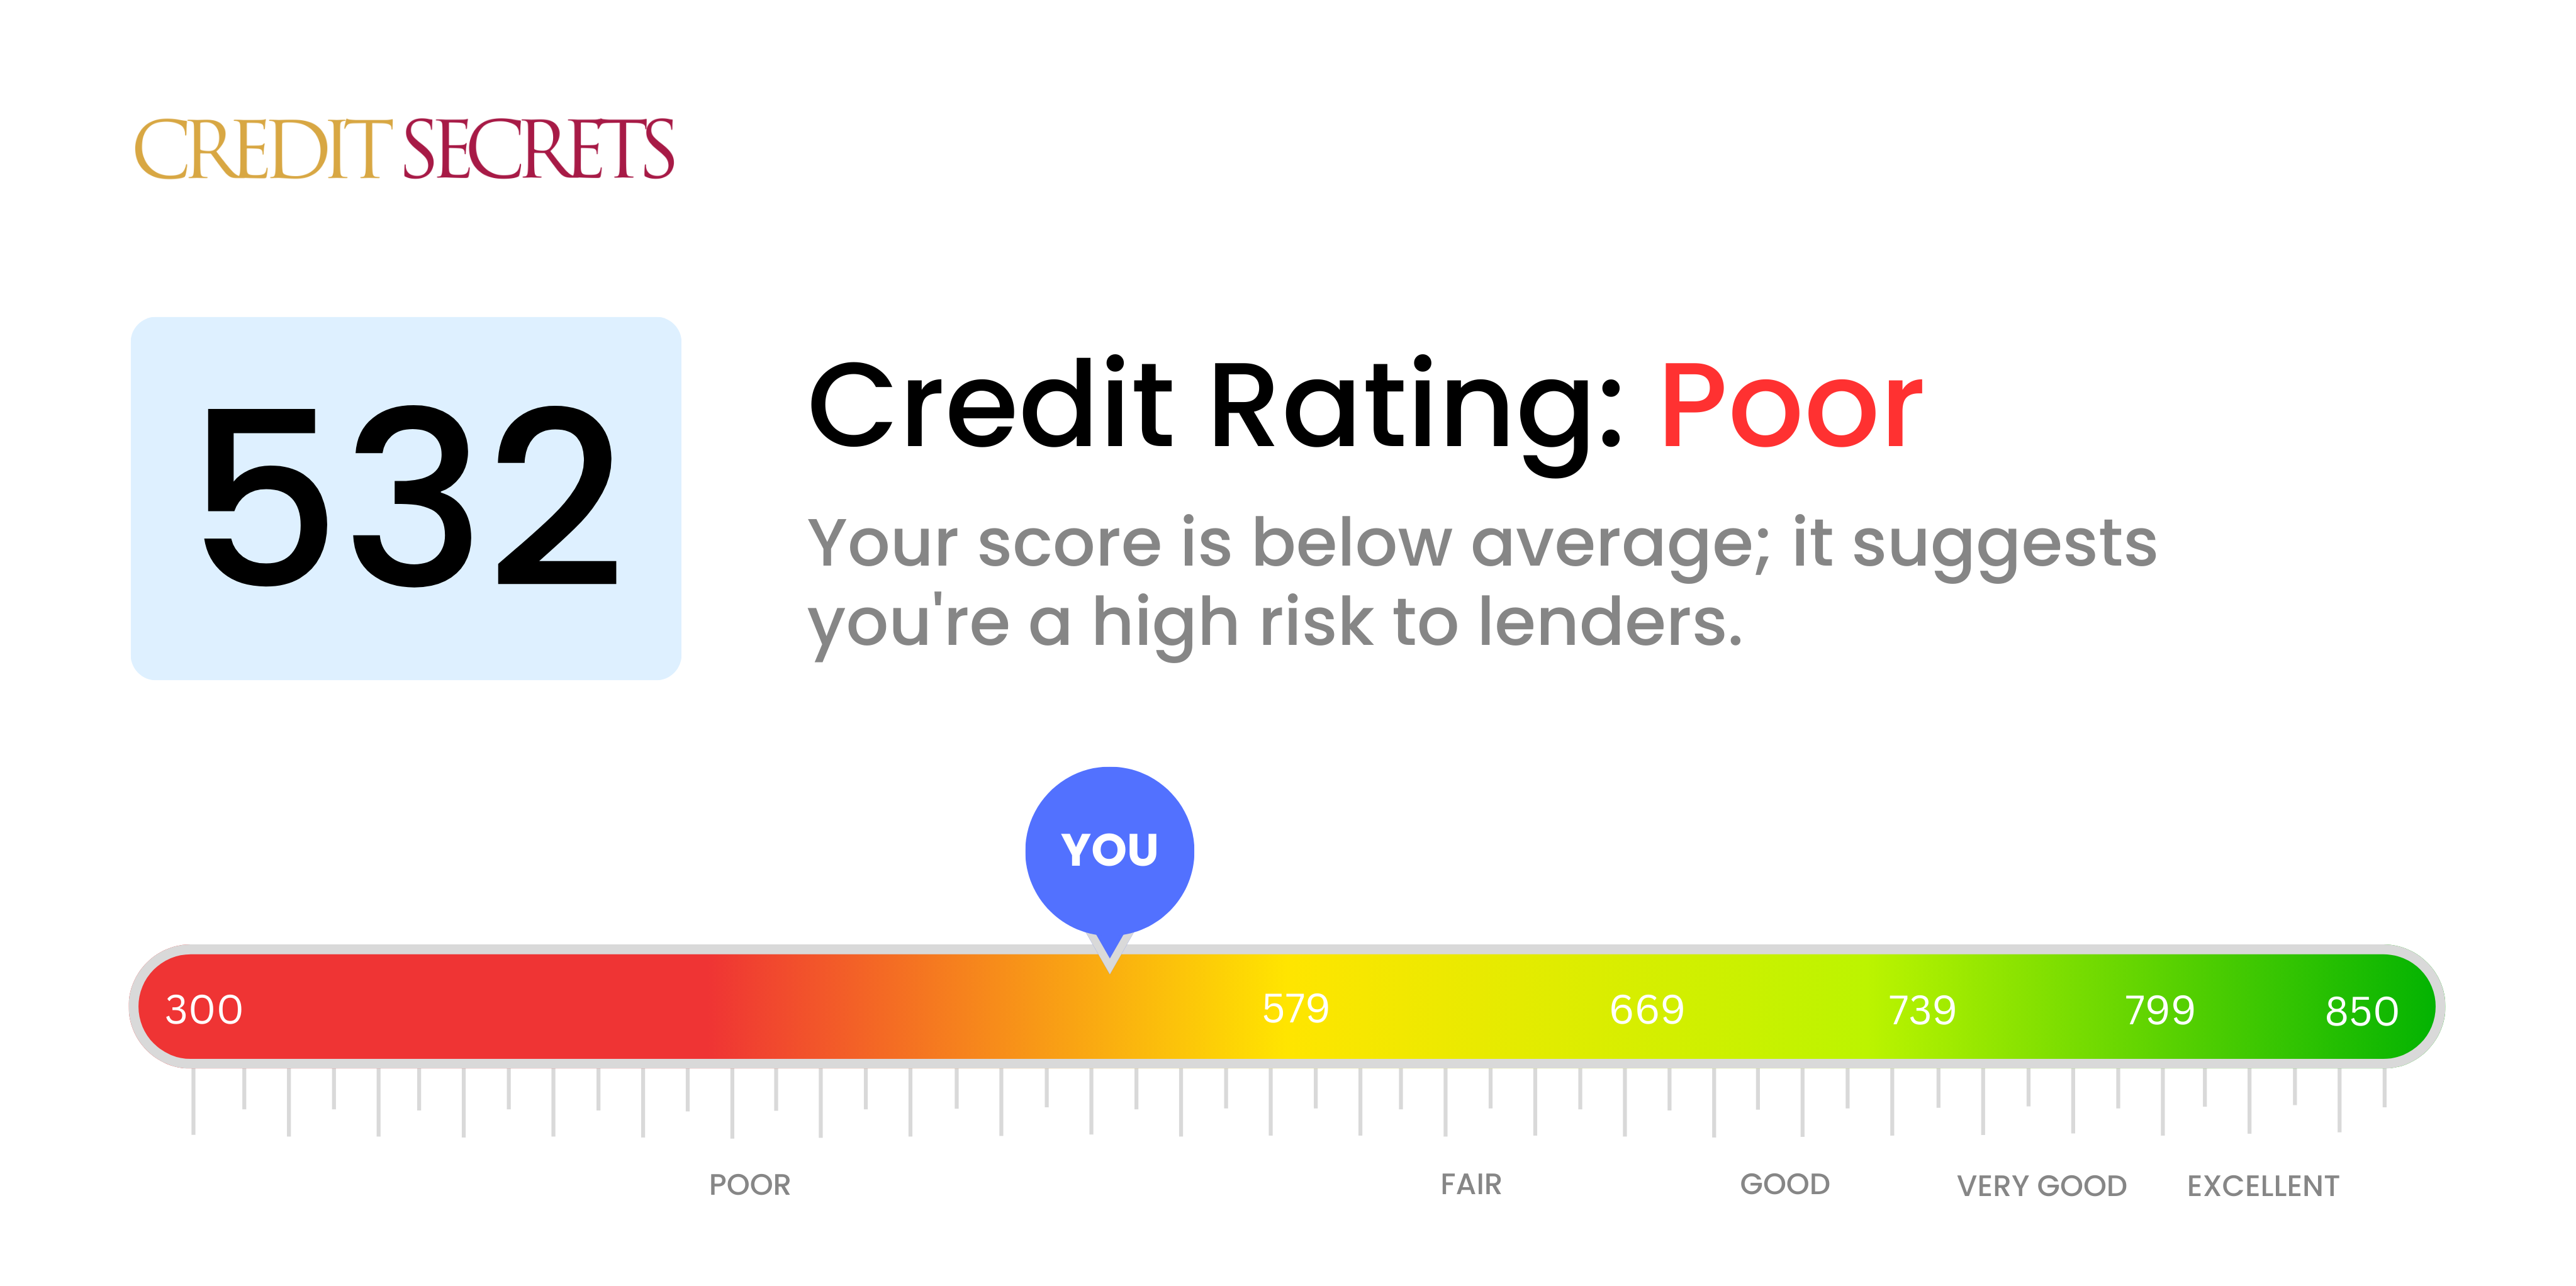 Is 532 a good credit score?